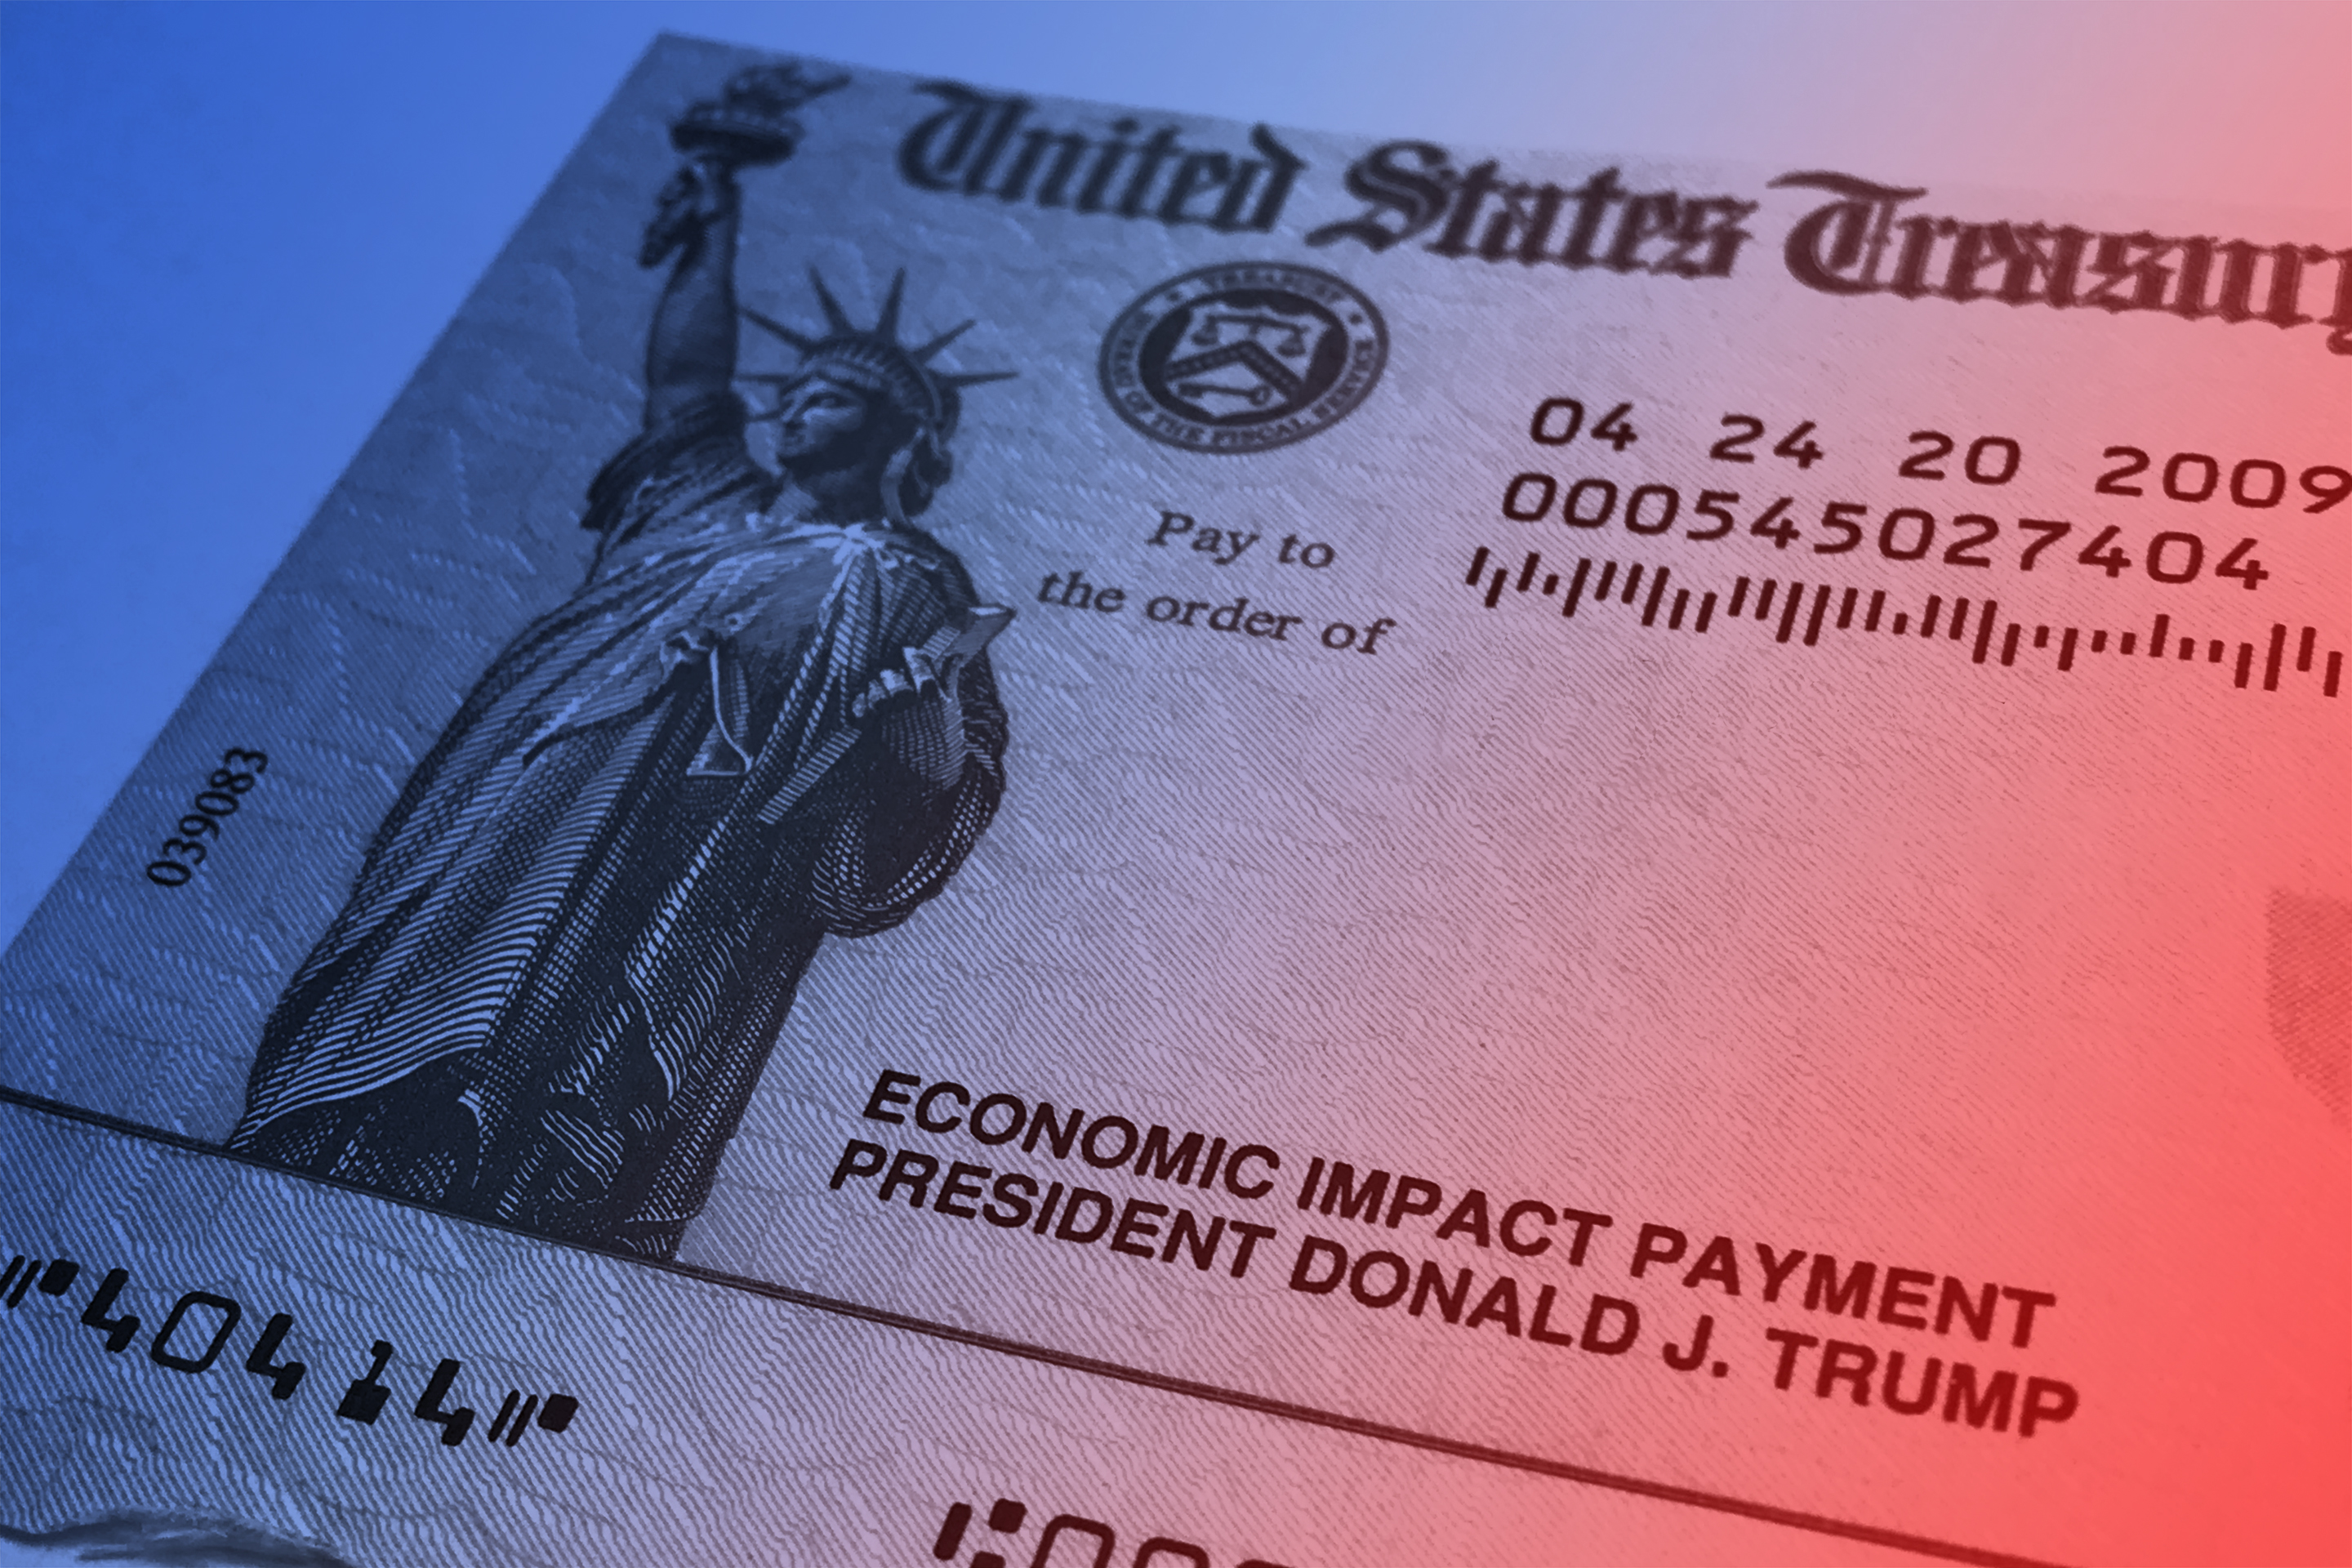 Trump Supporters and Critics Agree on Need for a Second Stimulus Check in New Money Survey